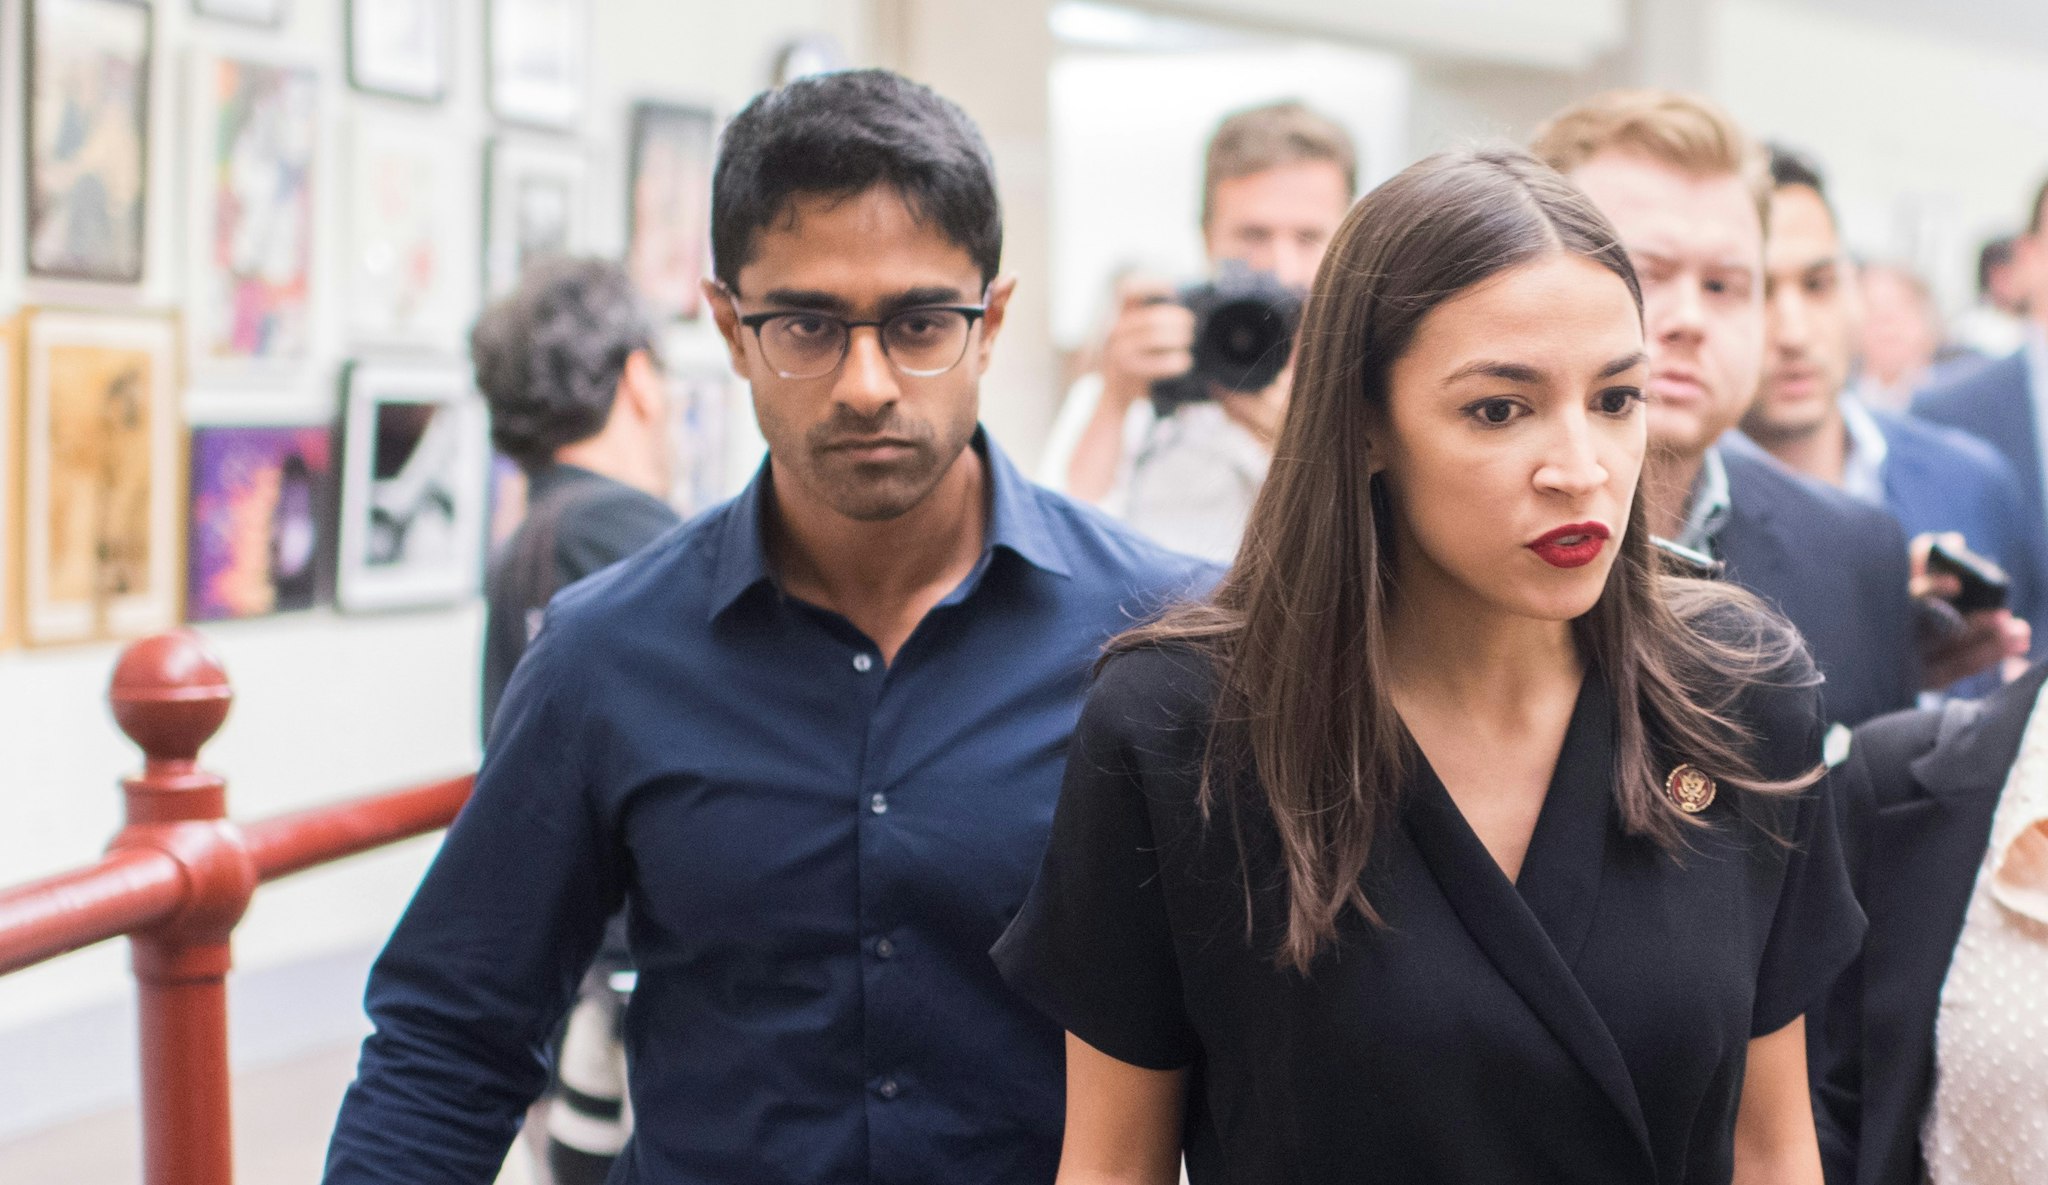 UNITED STATES - JULY 15: Rep Alexandria Ocasio-Cortez, D-N.Y., leaves a news conference in the Capitol Visitor Center after responding to negative comments by President Trump that were directed at the freshman House Democrats on Monday, July 15, 2019. Her chief of staff, Saikat Chakrabarti, appears at left.